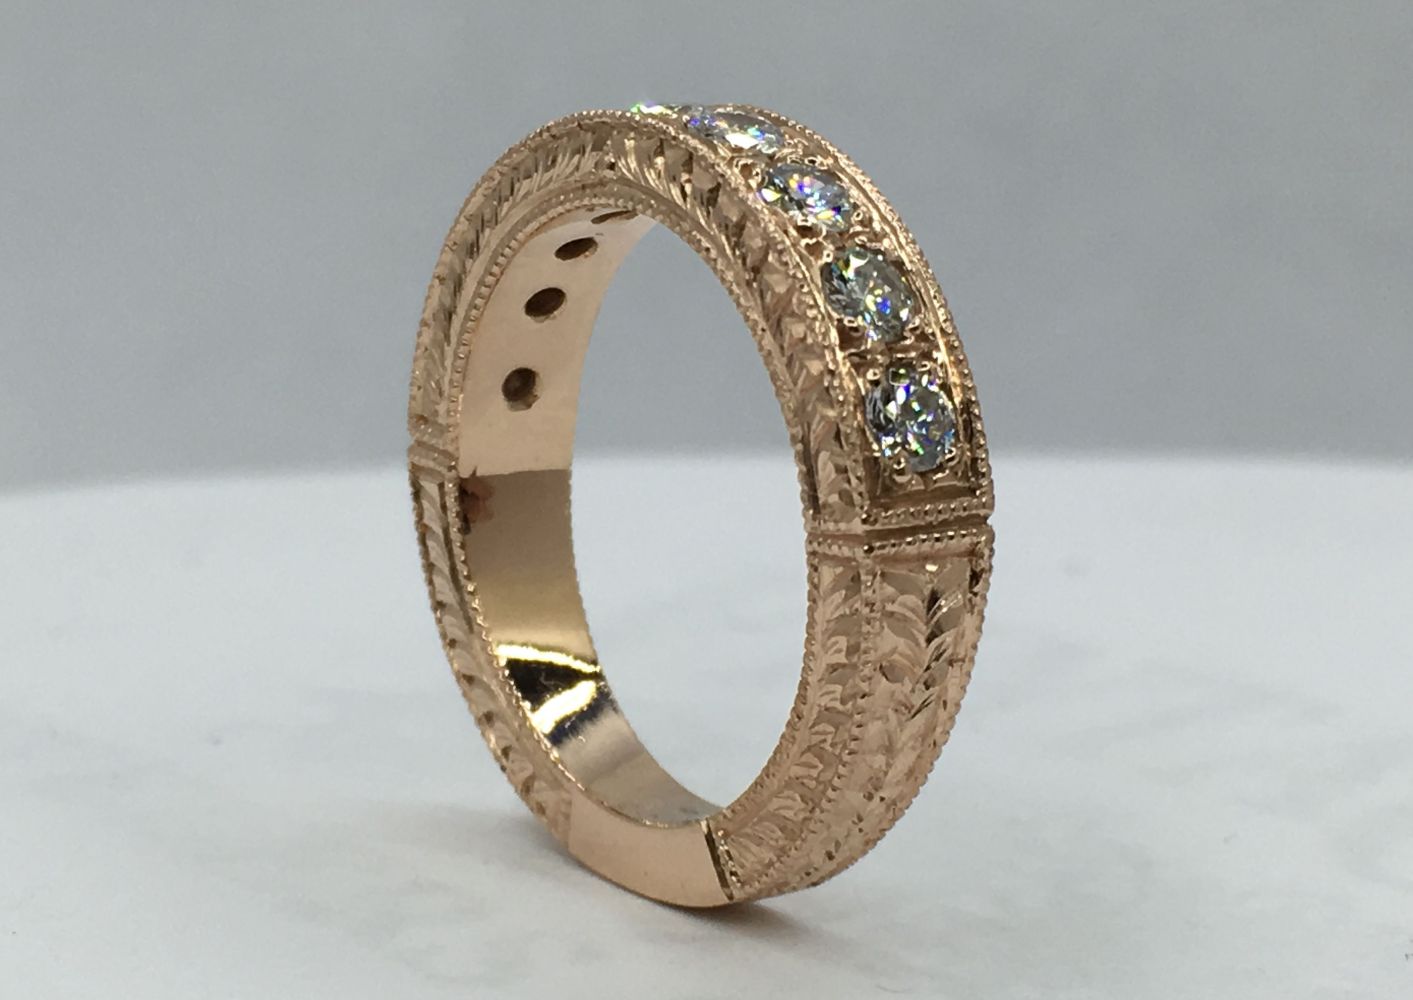 Making a hand engraved rose gold and pave diamond ring